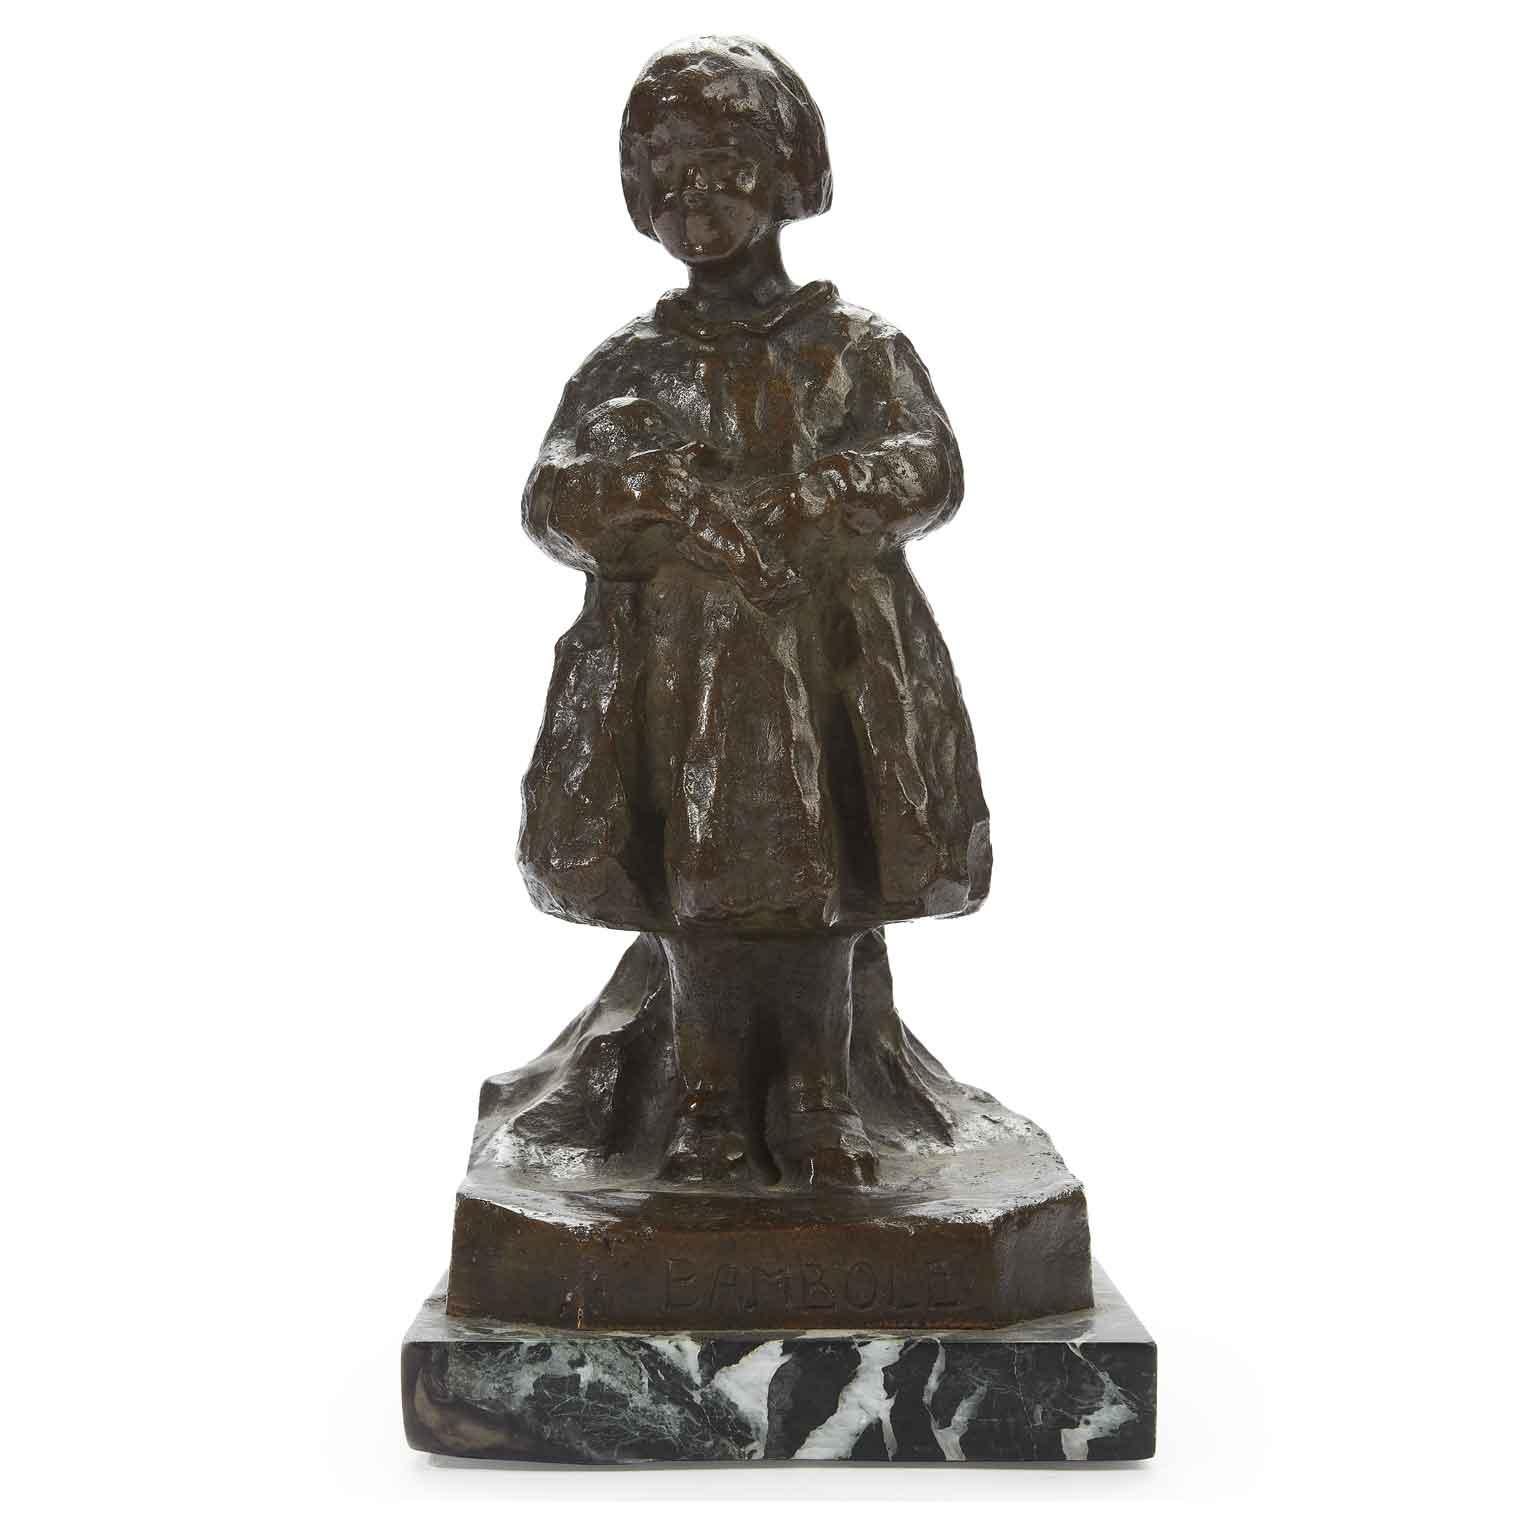 A bronze casting figurative sculpture, a child figure of a lovely little girl with a doll in her arms, entitled Bambole, meaning Dolls, standing on a rectangular green marble basement and dating back to the Italian Fascism period, circa 1938.
This